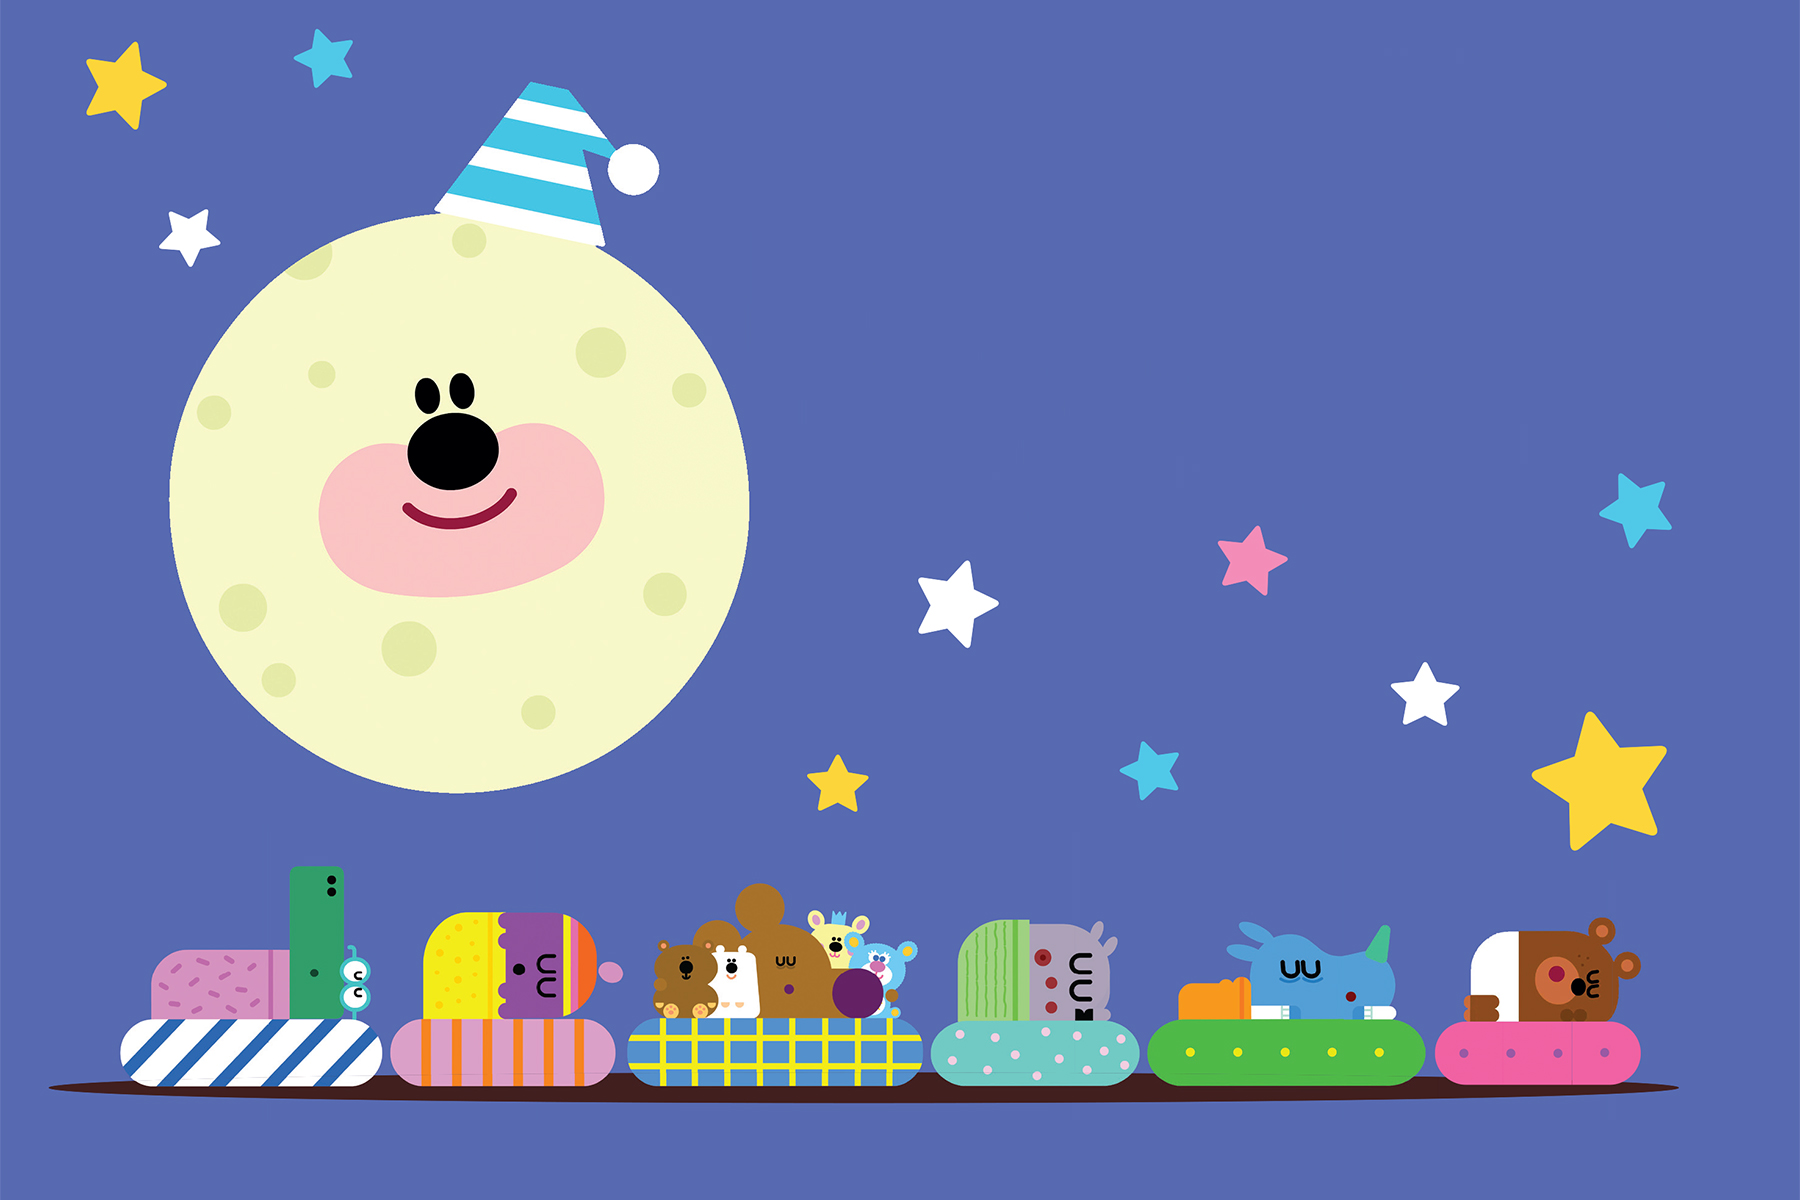 An illustration from the book Hey Duggee: The Bedtime Badge. The Squirrels are all fast asleep in their beds against a blue backdrop with colourful stars, and there is a moon in the top left hand corner that has Duggee's face